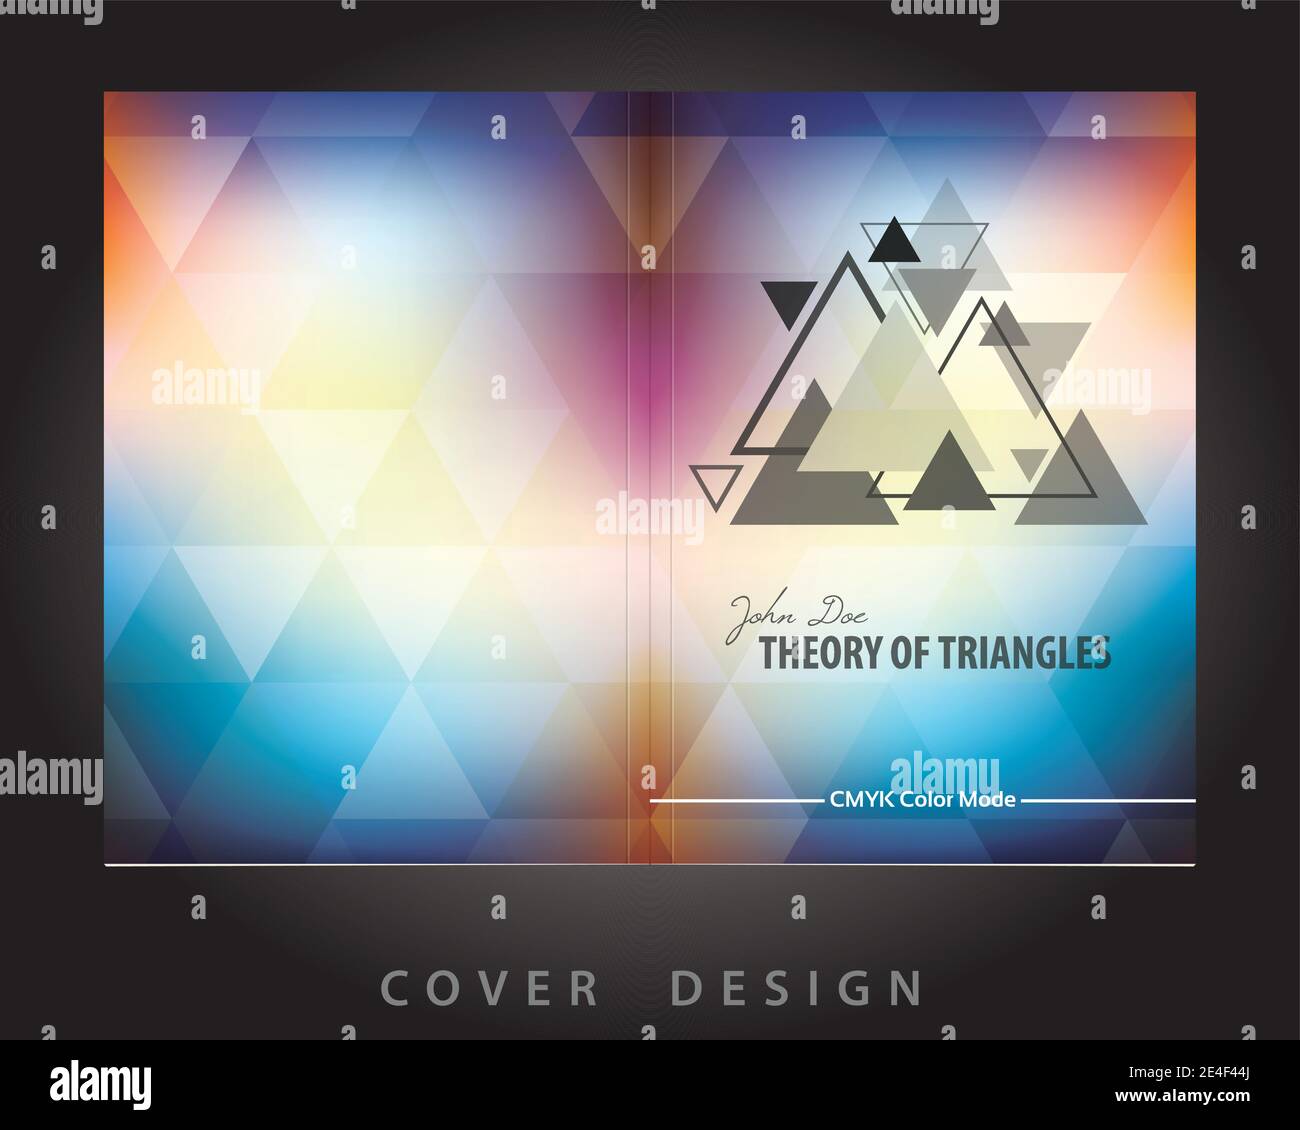 Template of abstract brochure cover design with triangles pattern. CMYK color mode. Bleeds into Clipping mask. Vector Stock Vector